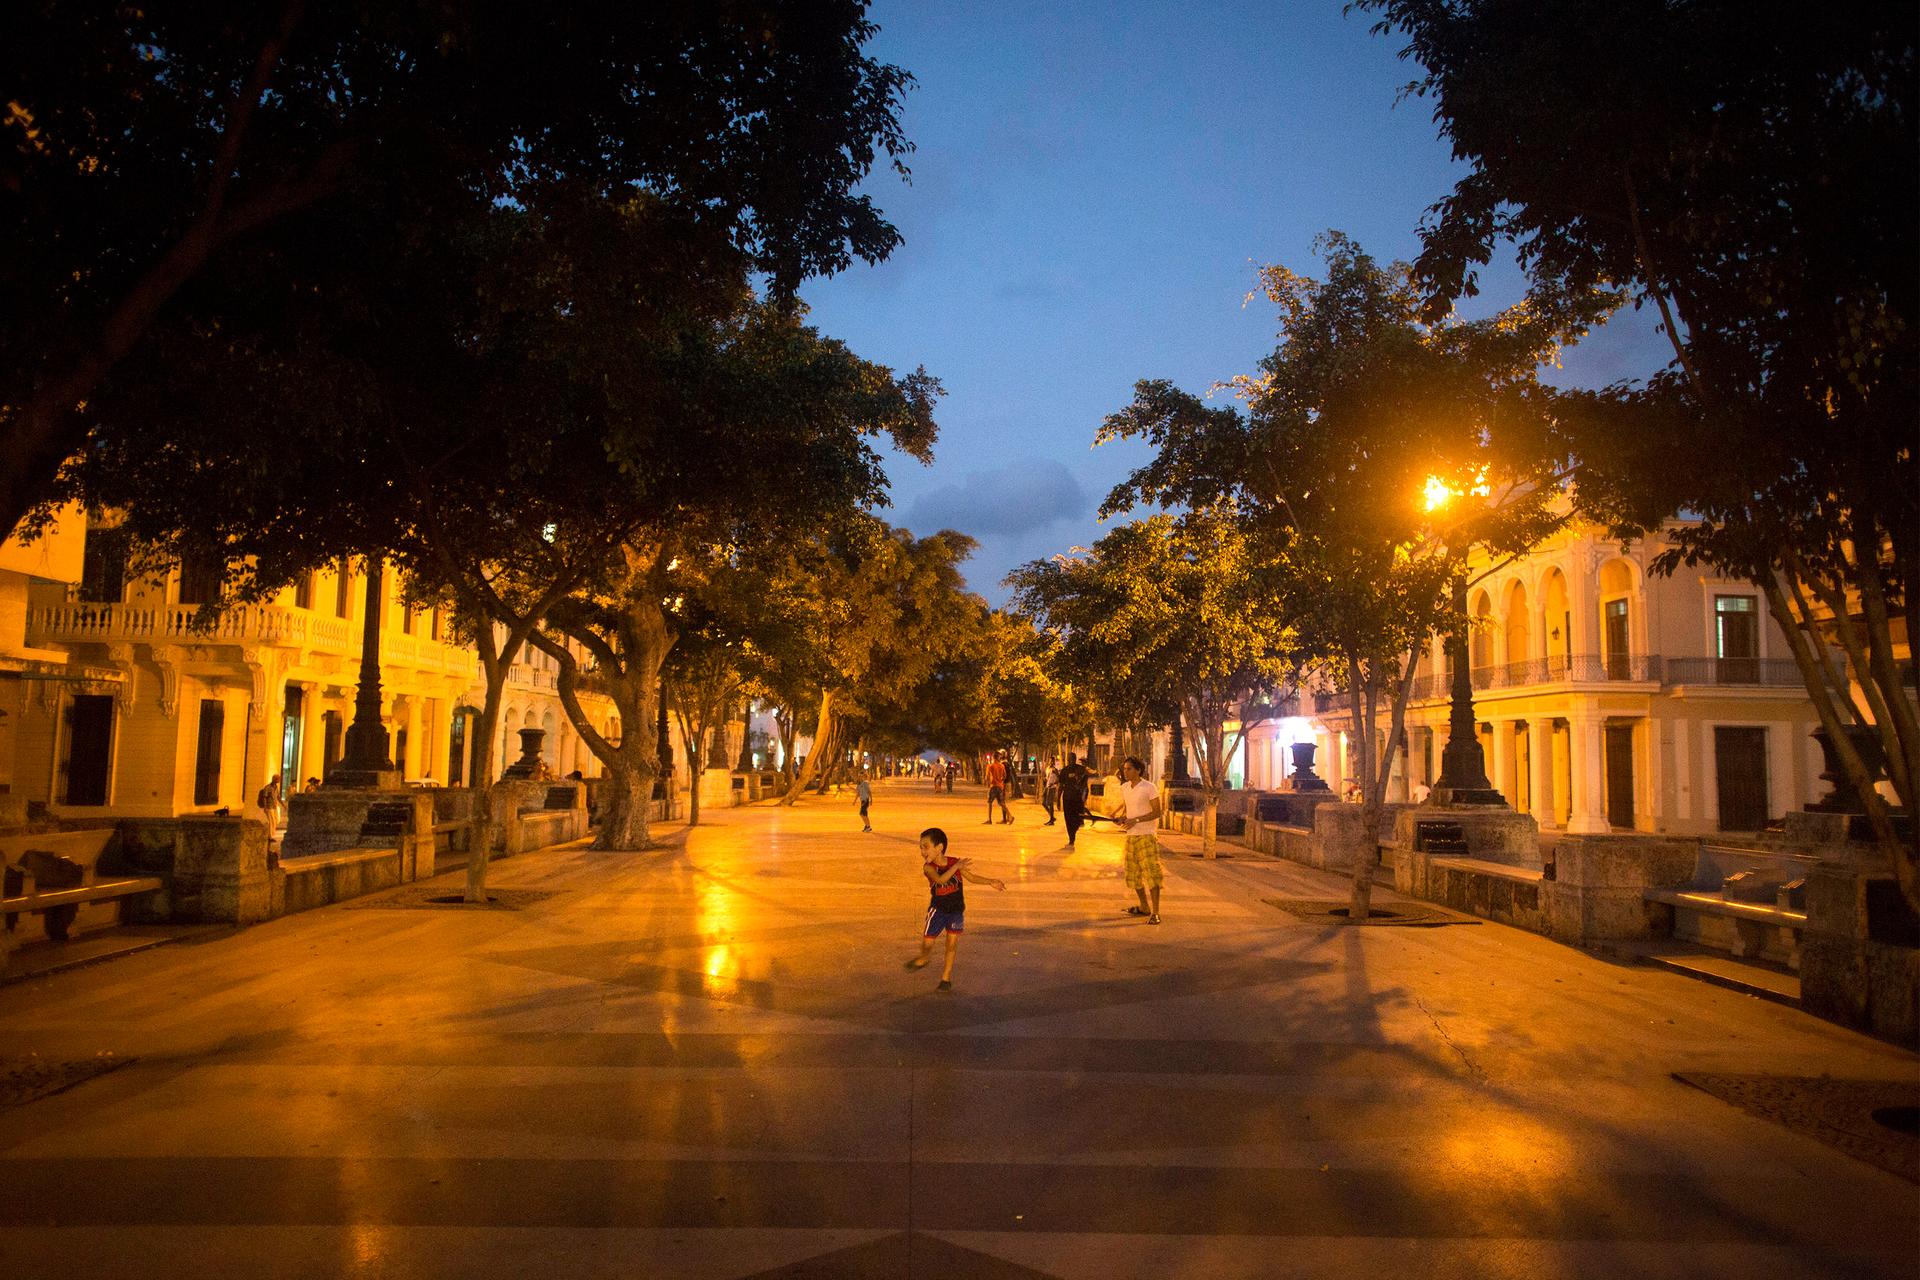 A child plays at the Prado Boulevard in downtown Havana.